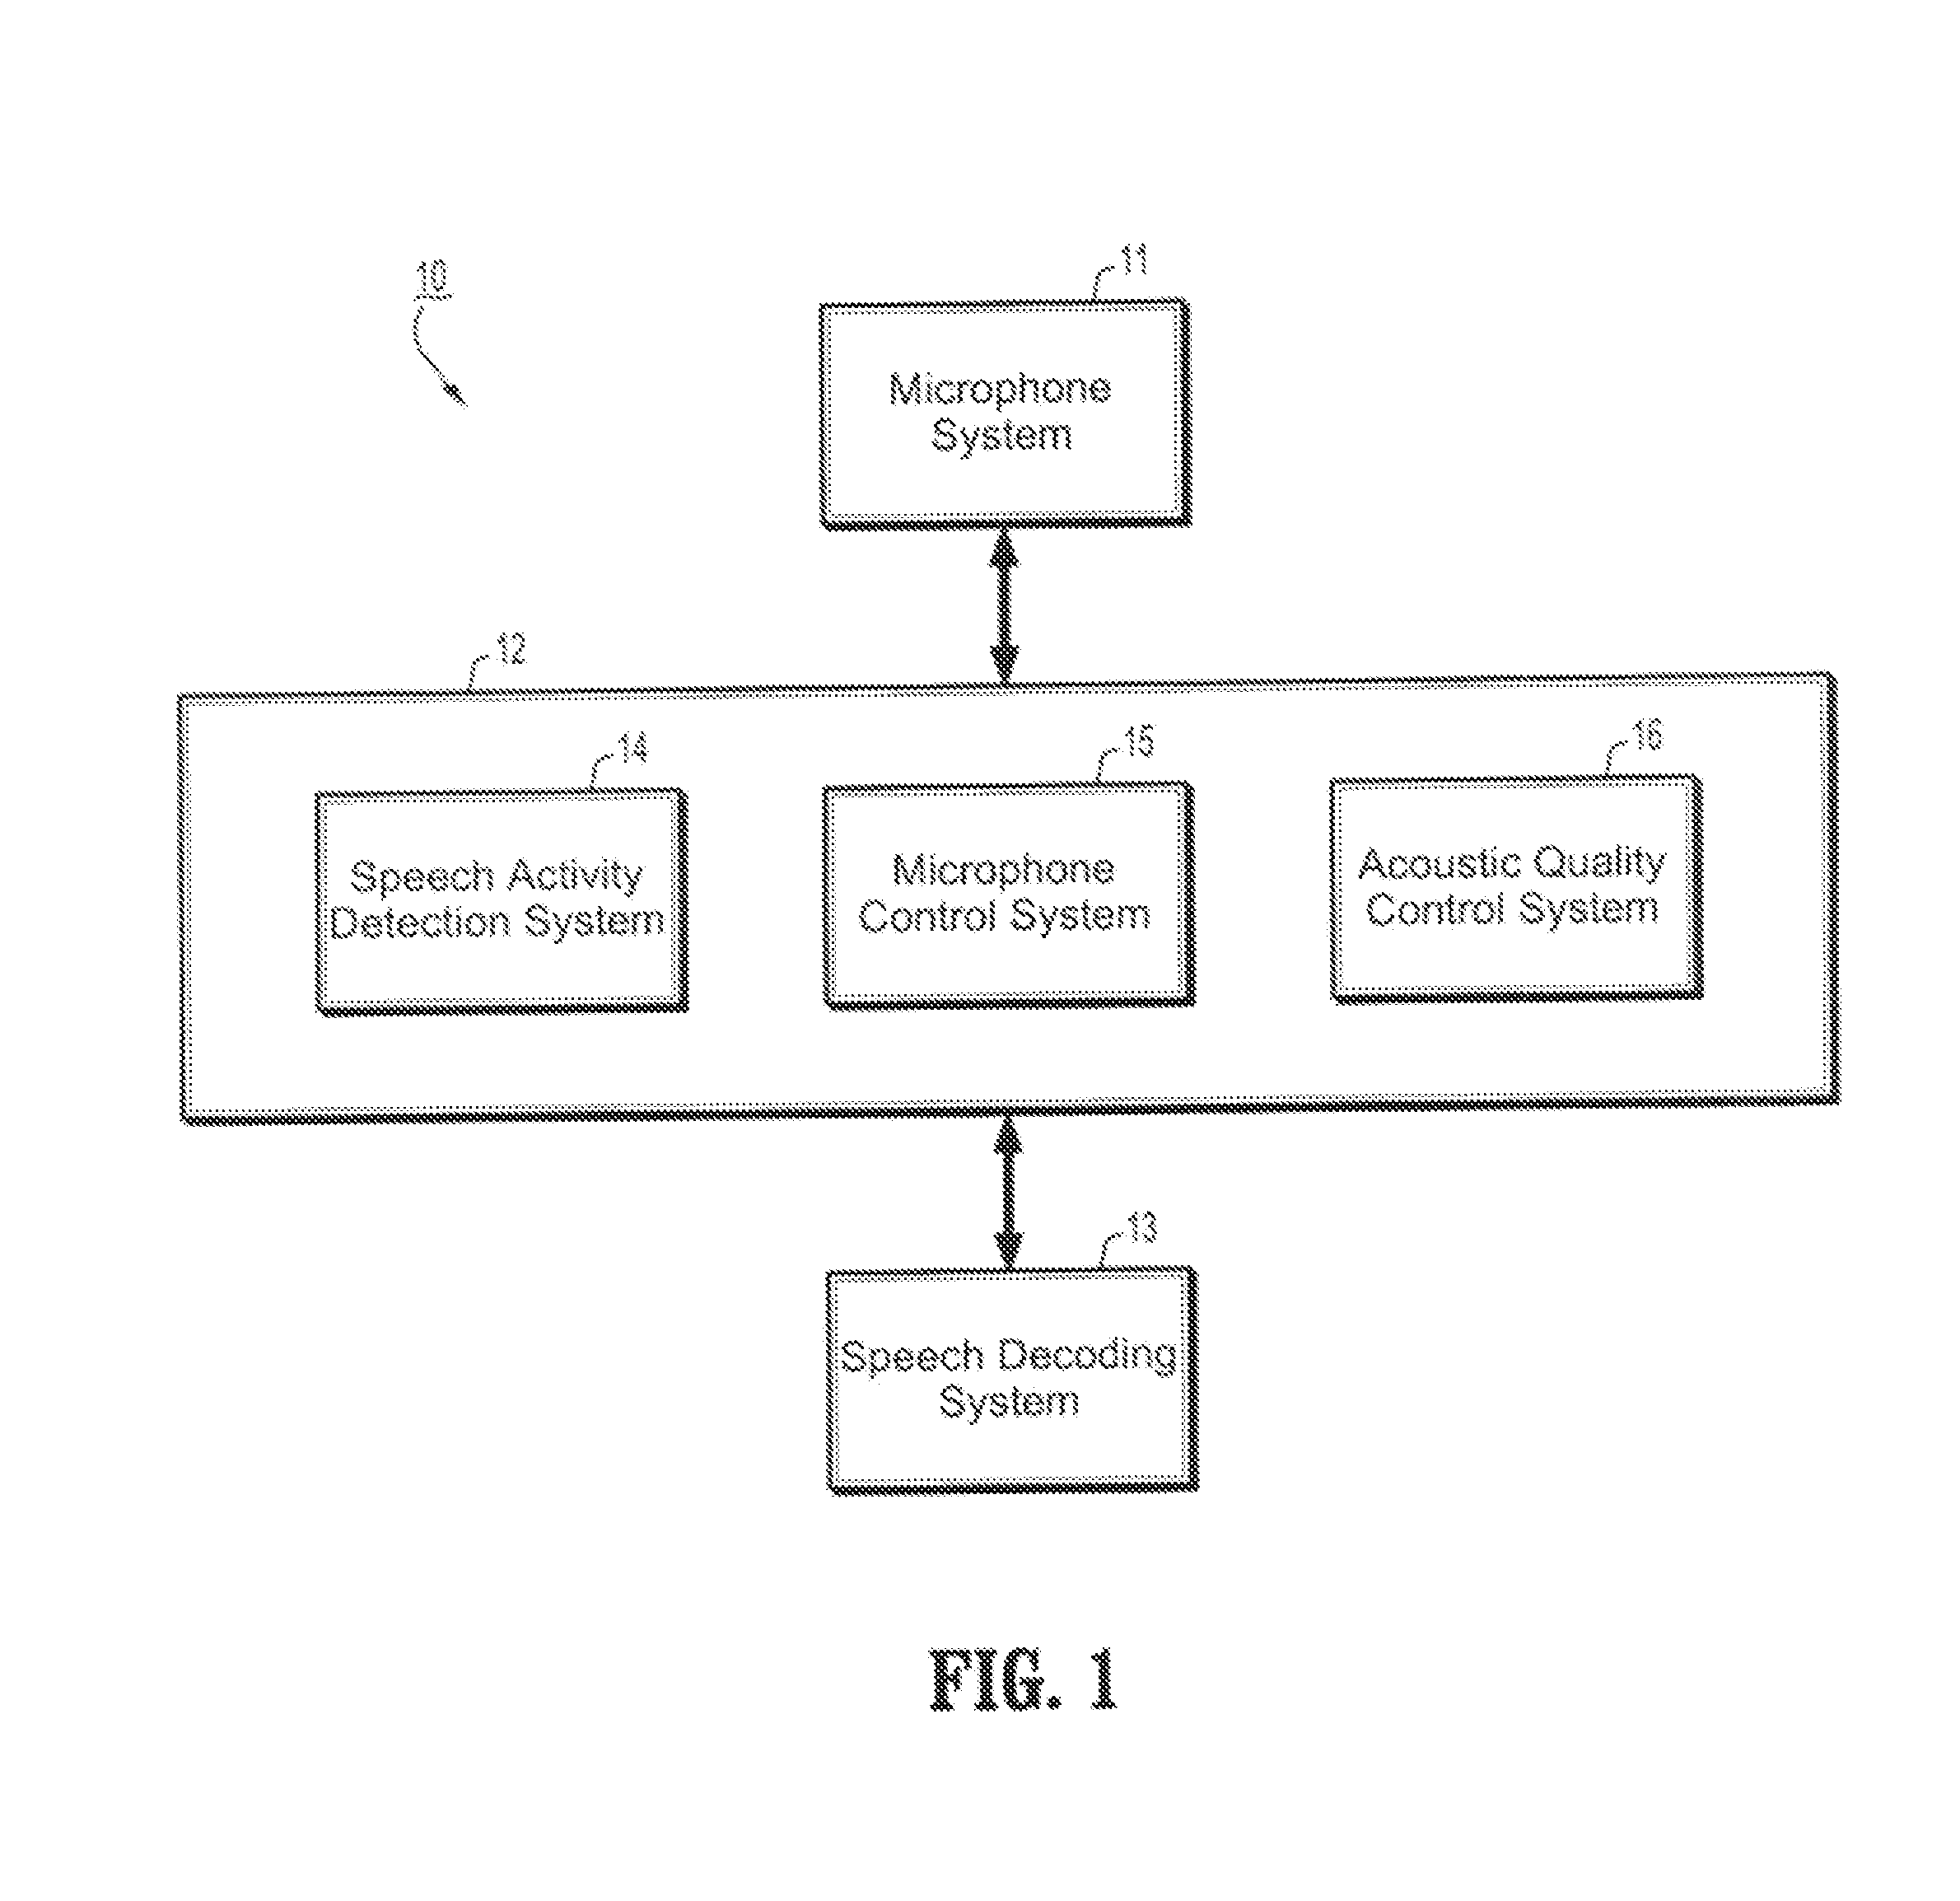 Systems and methods for intelligent control of microphones for speech recognition applications